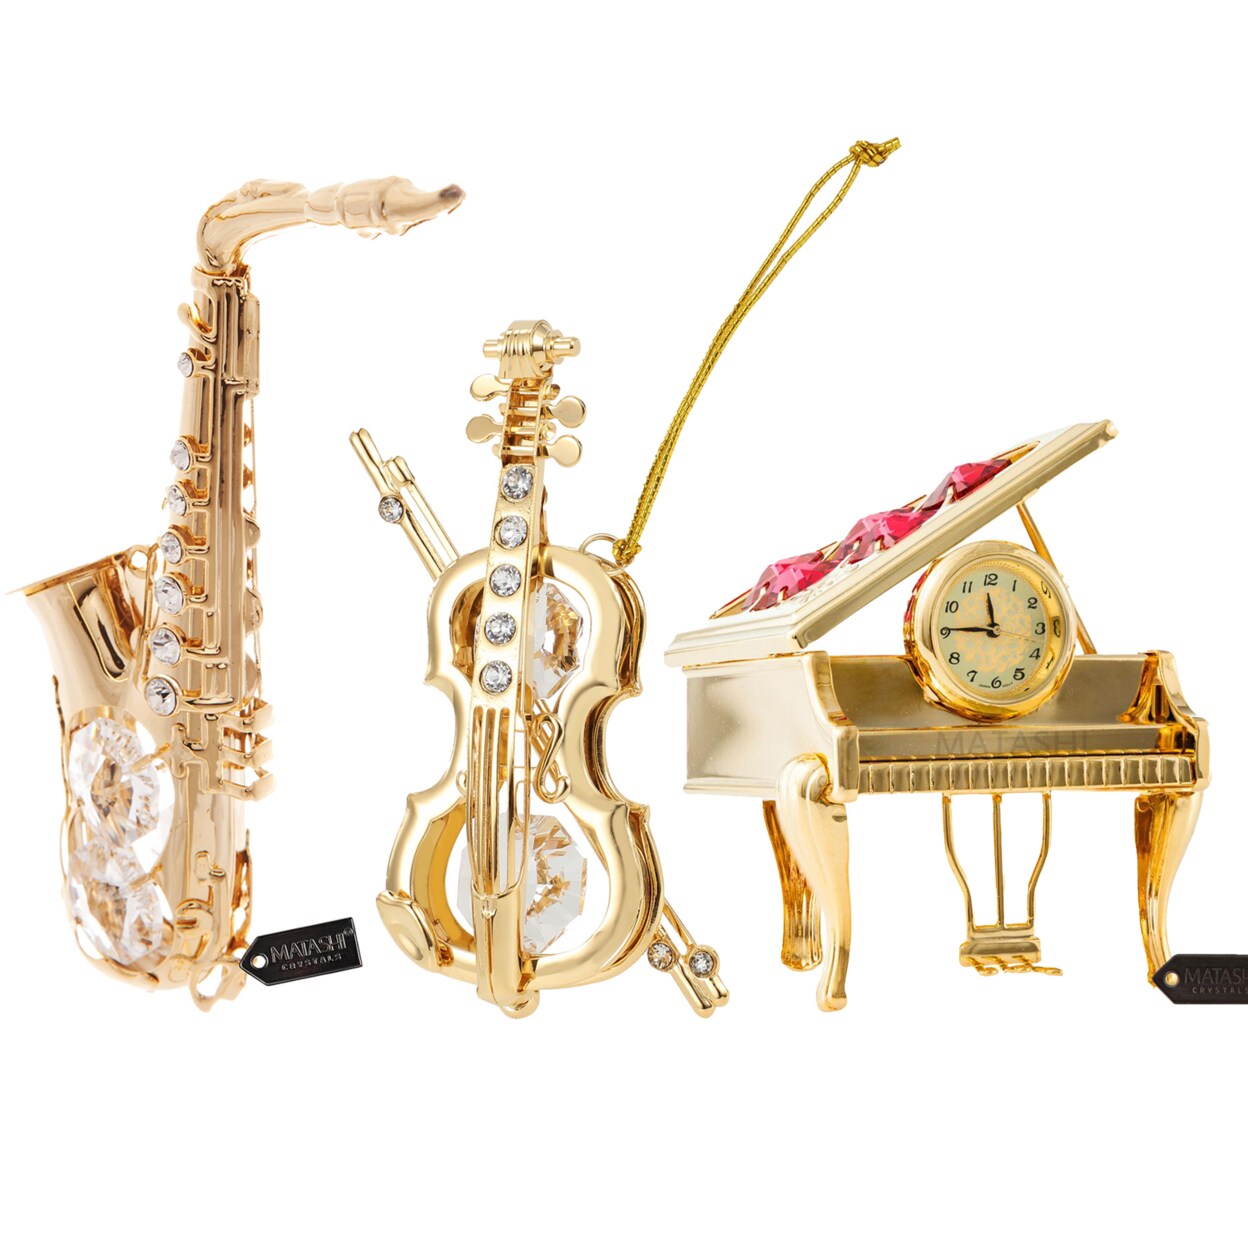 Matashi   24K Gold Plated Vintage Piano Desk Clock with Crystal Studded Violin Bow And Saxophone Ornament